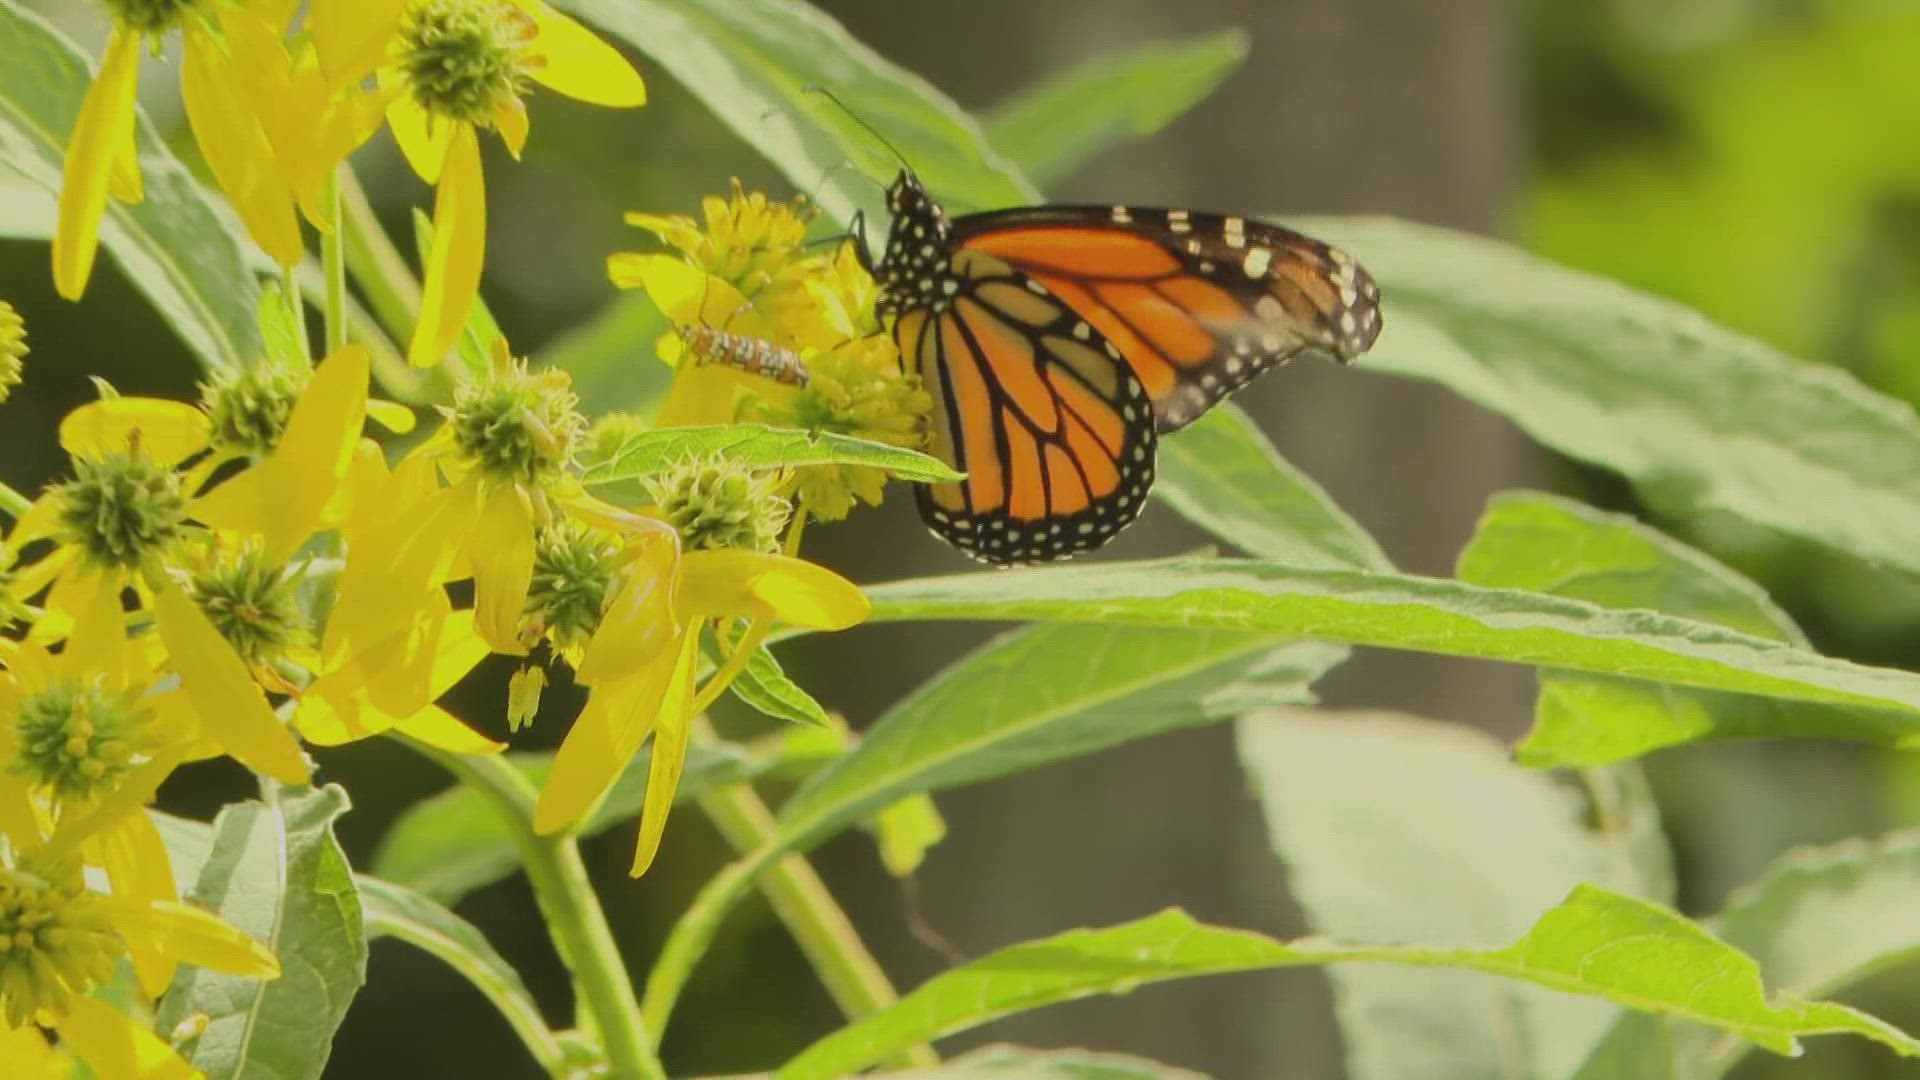 Copper and Kings, a brandy distillery in Butchertown, is helping the endangered Monarch Butterfly species.